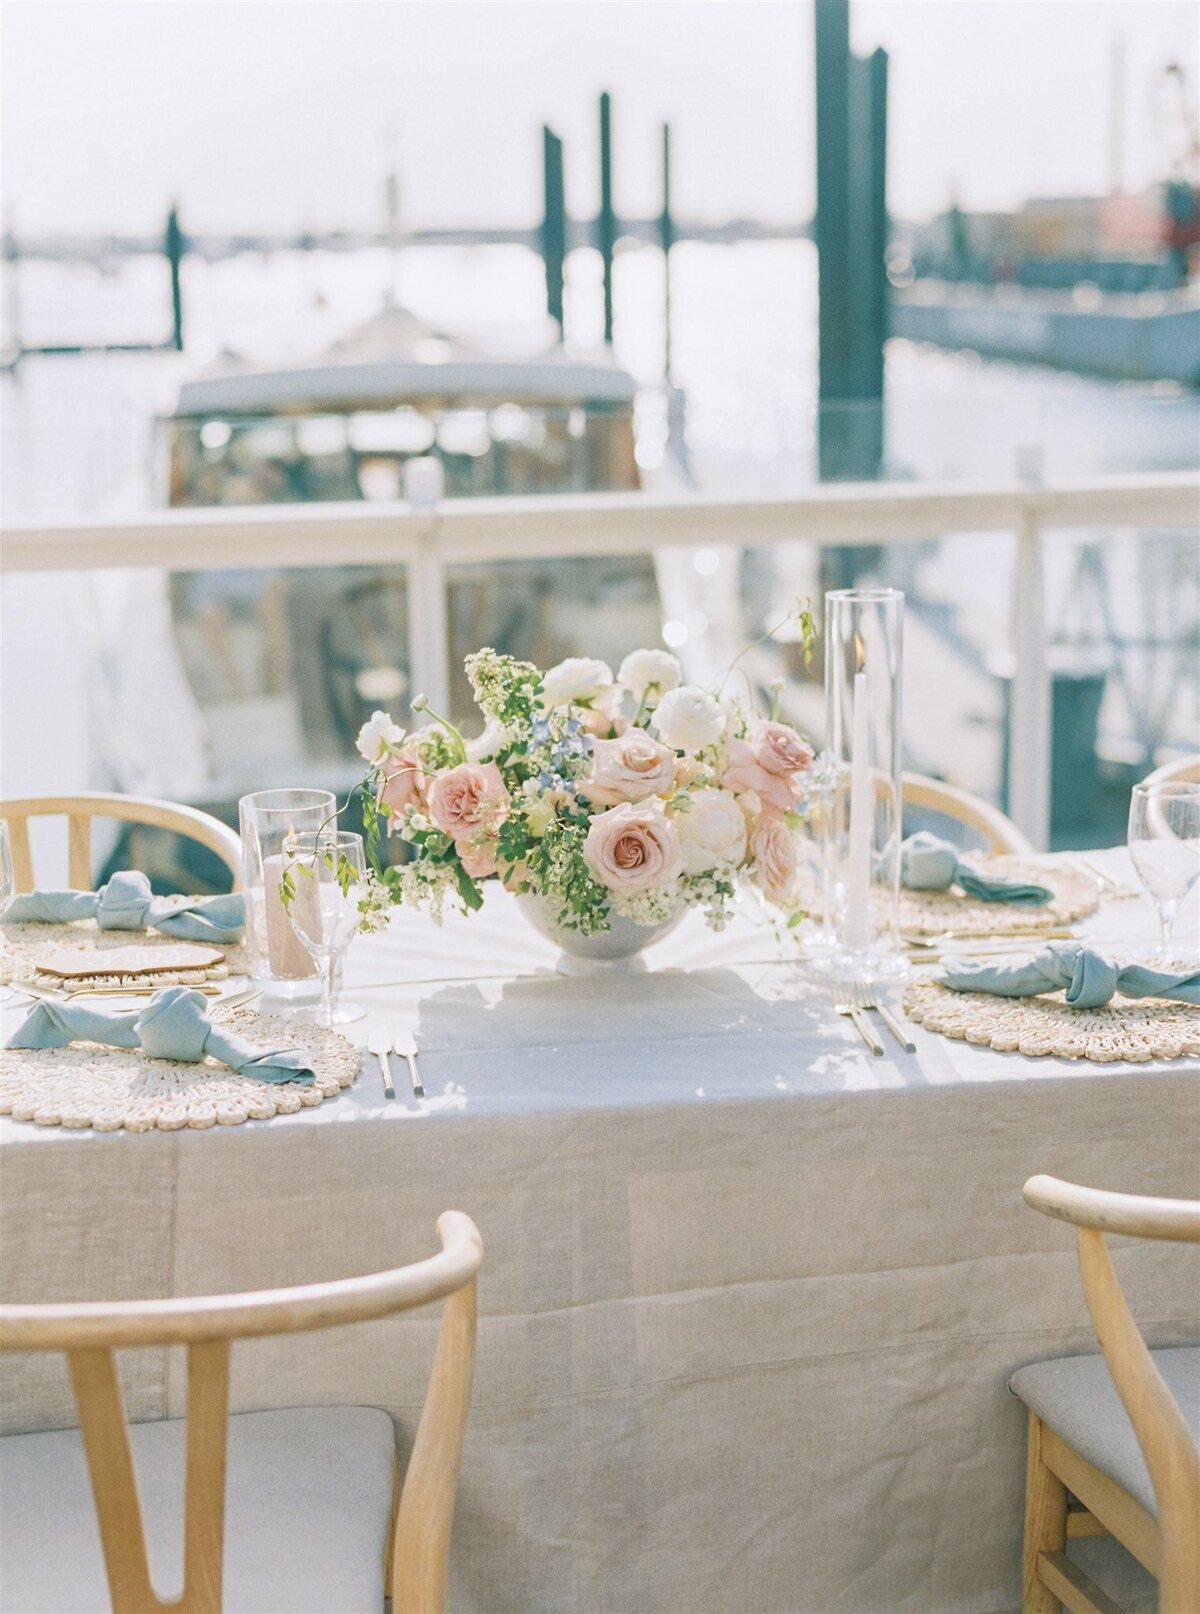 Kate-Murtaugh-Events-wedding-planner-Newport-intimate-outdoor-reception-spring-floral-centerpieces-boat-dock-marina